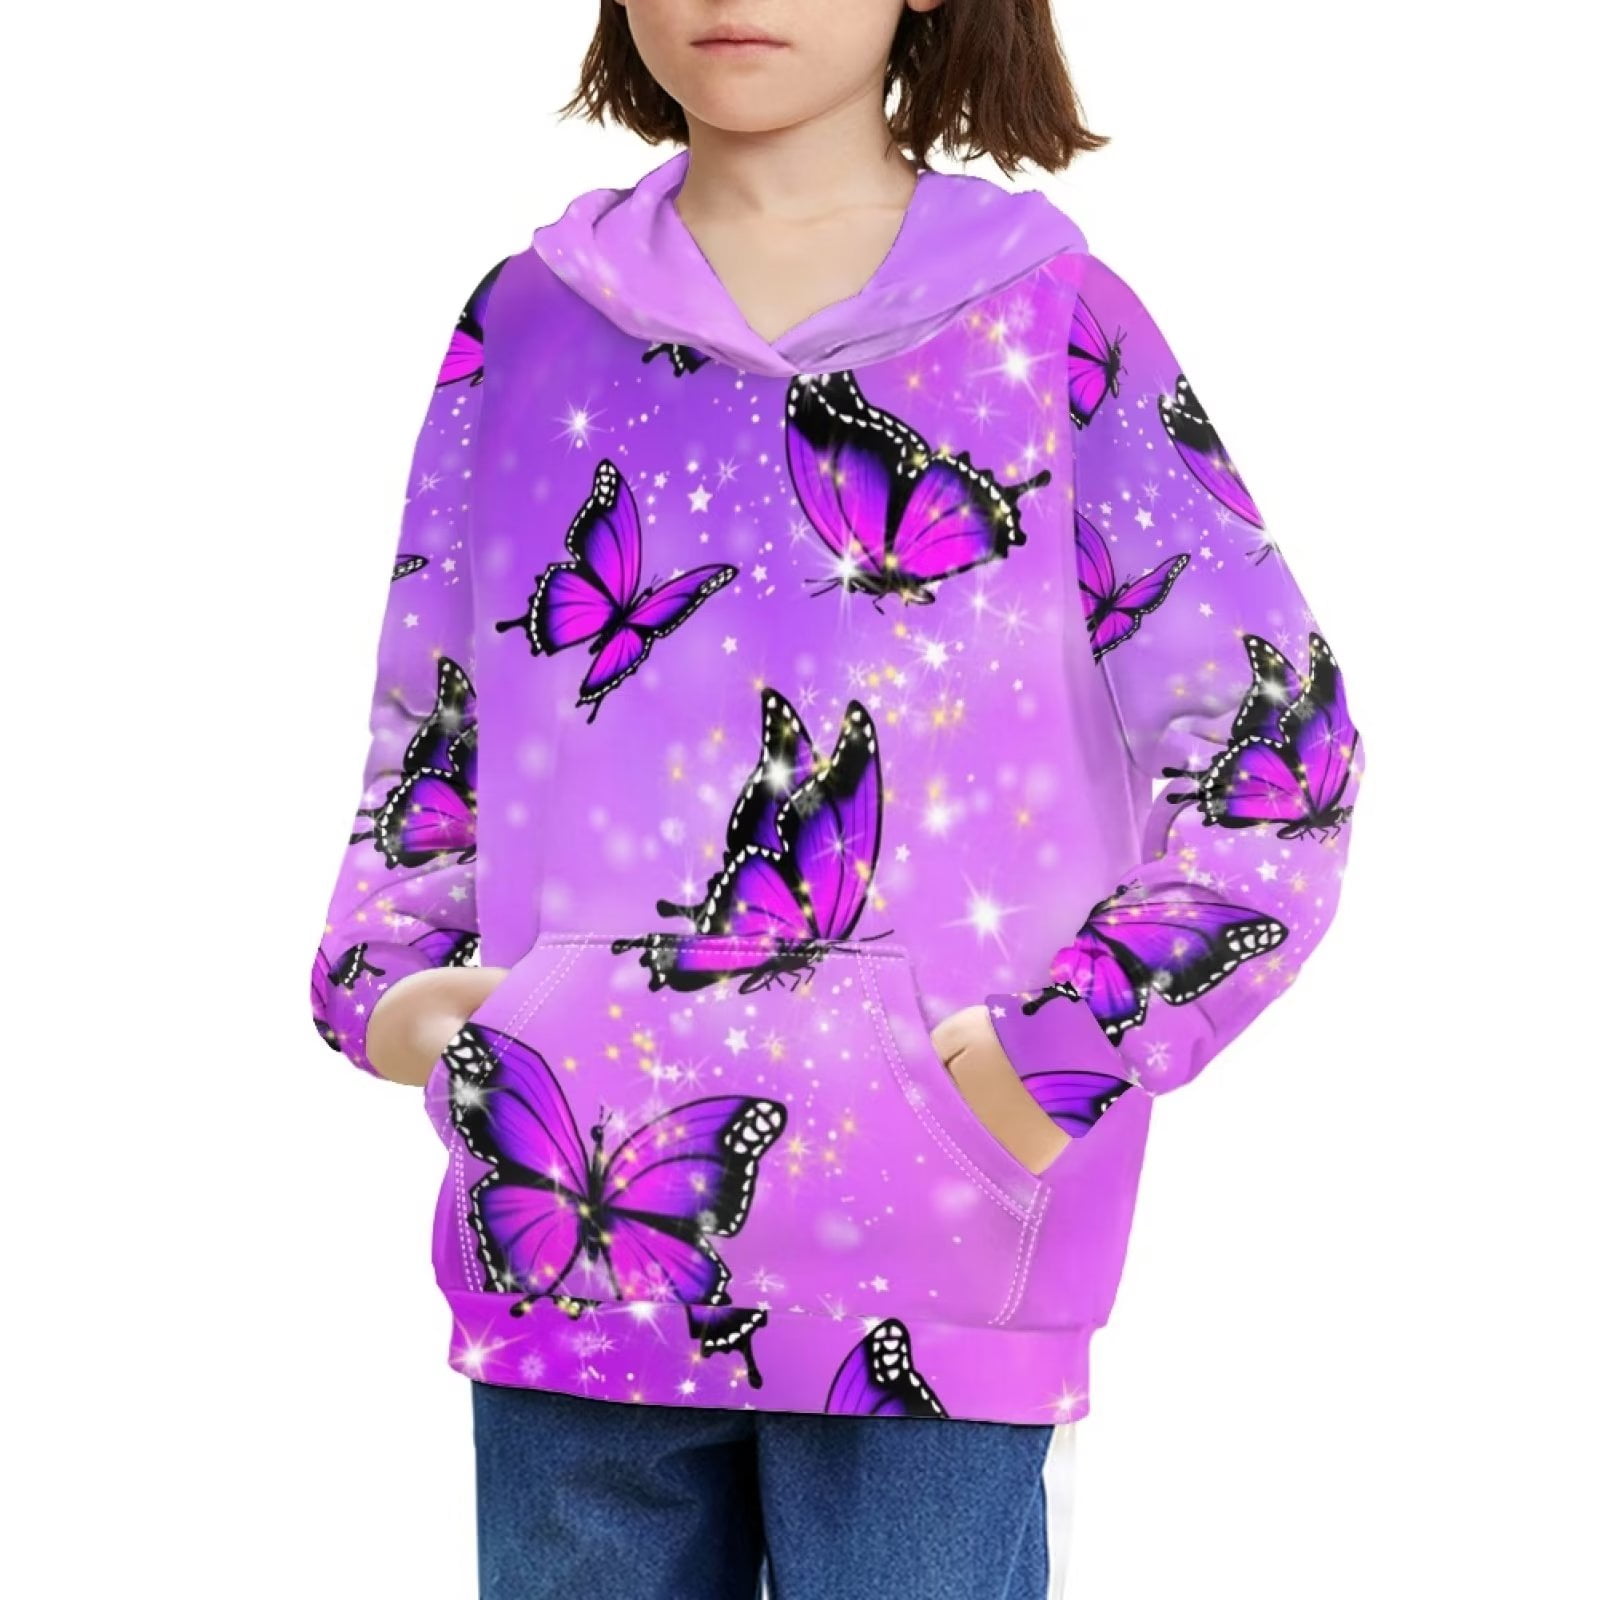 Fkelyi Kids Girls Hoodies with Glitter Butterfly Size 14-16 Years Comfortable Youth Children Unisex Hooded Pullover Casual Daily Life Purple Long